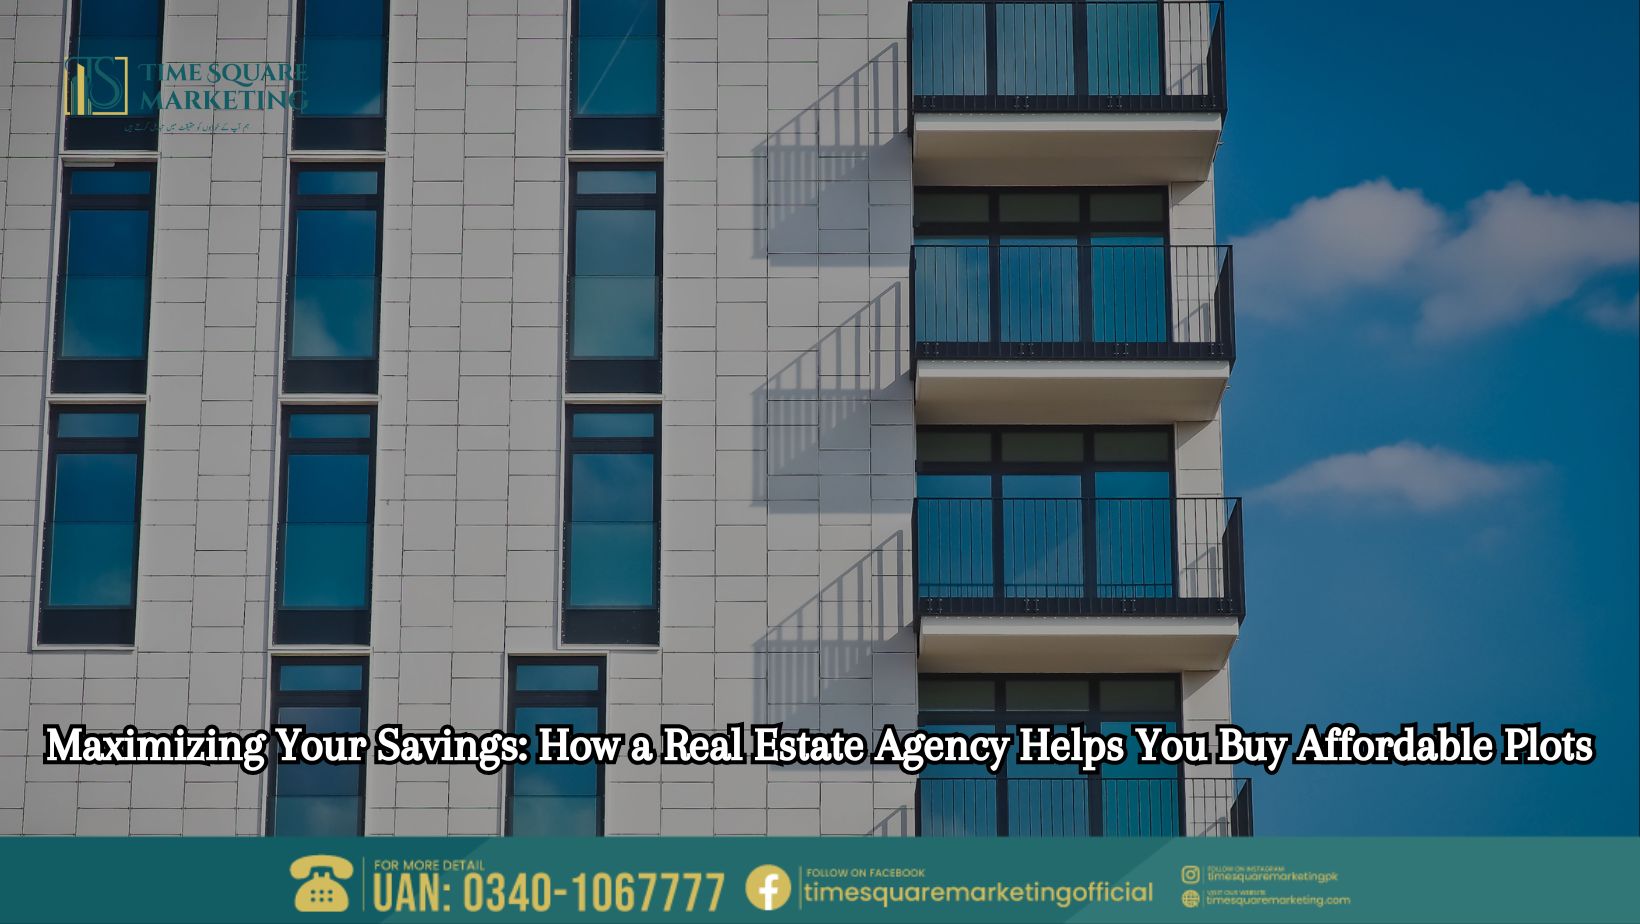 Maximizing Your Savings How a Real Estate Agency Helps You Buy Affordable Plots